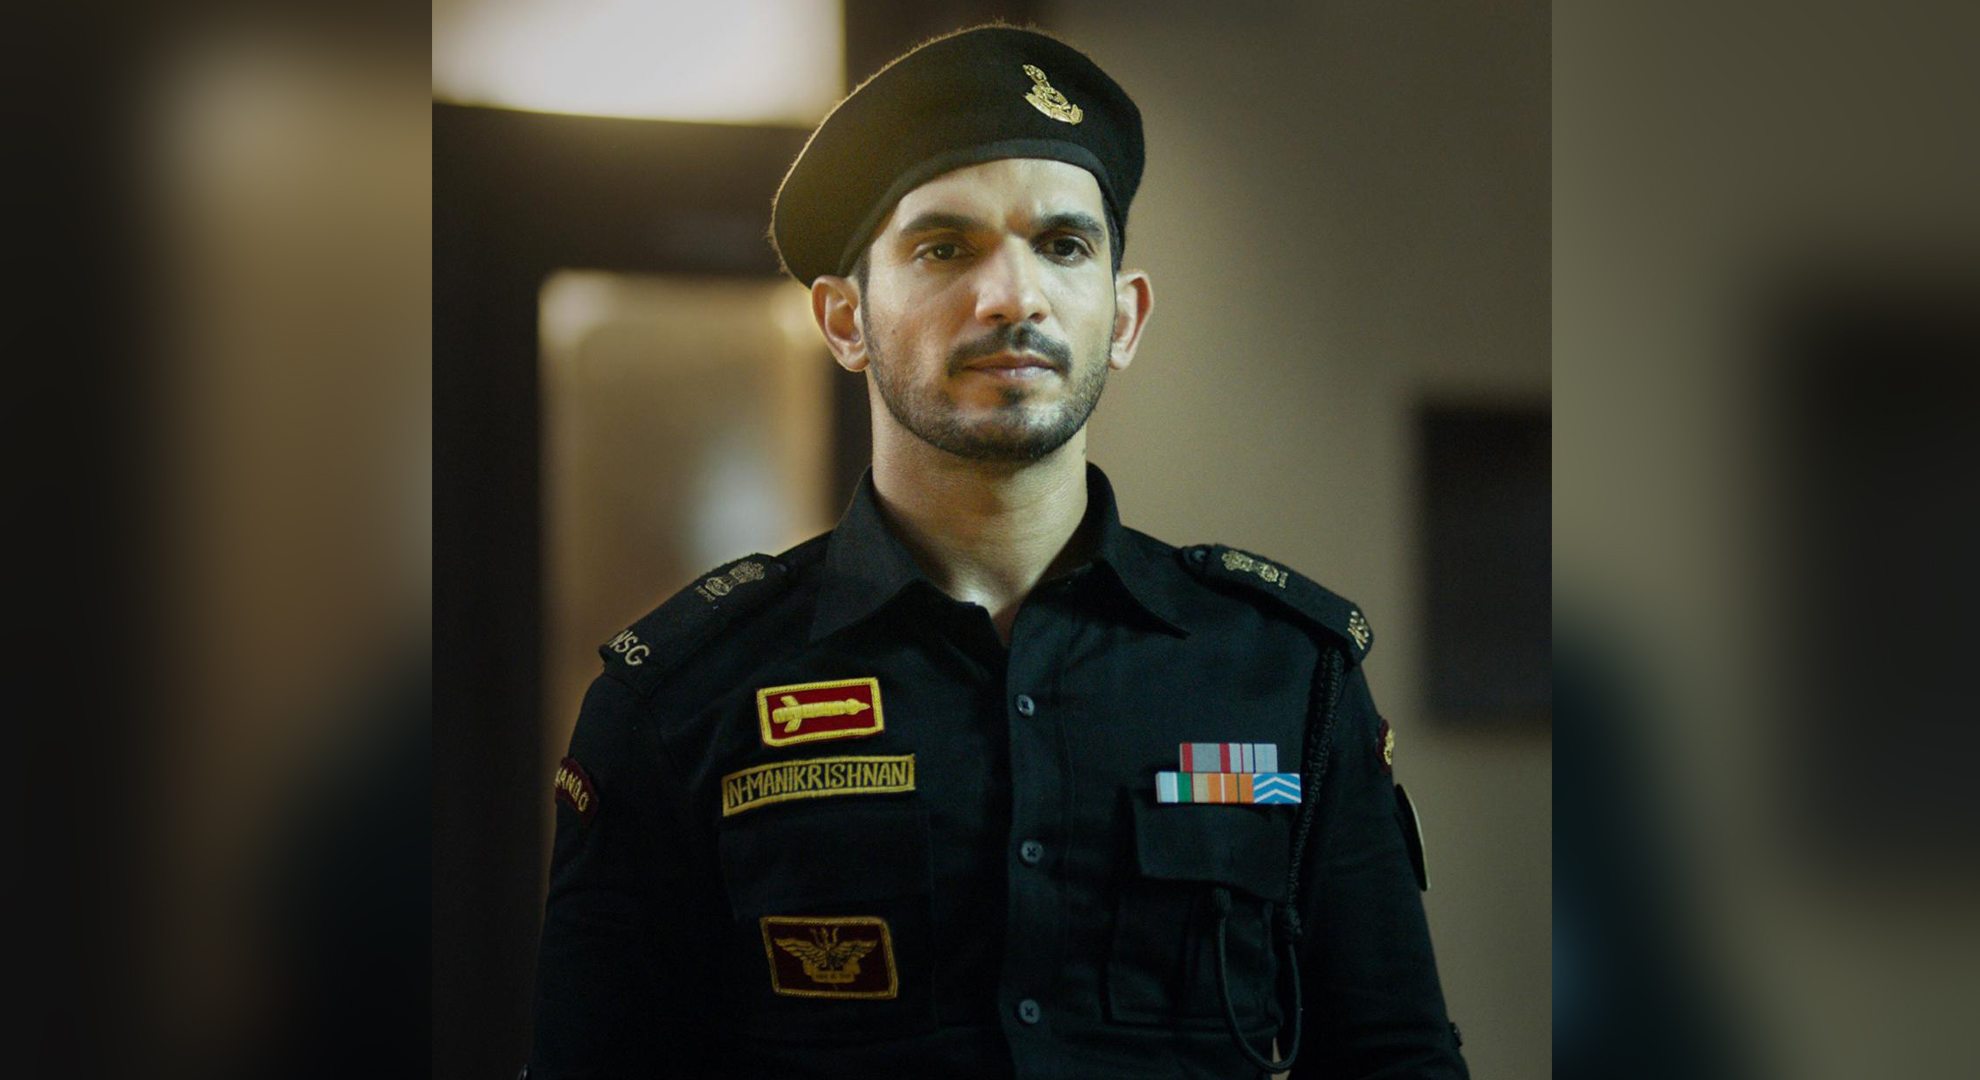 FIND OUT HOW ARJUN BIJLANI PREPARED FOR HIS CHARACTER BEFORE DOING ZEE5’S STATE OF SIEGE: 26/11